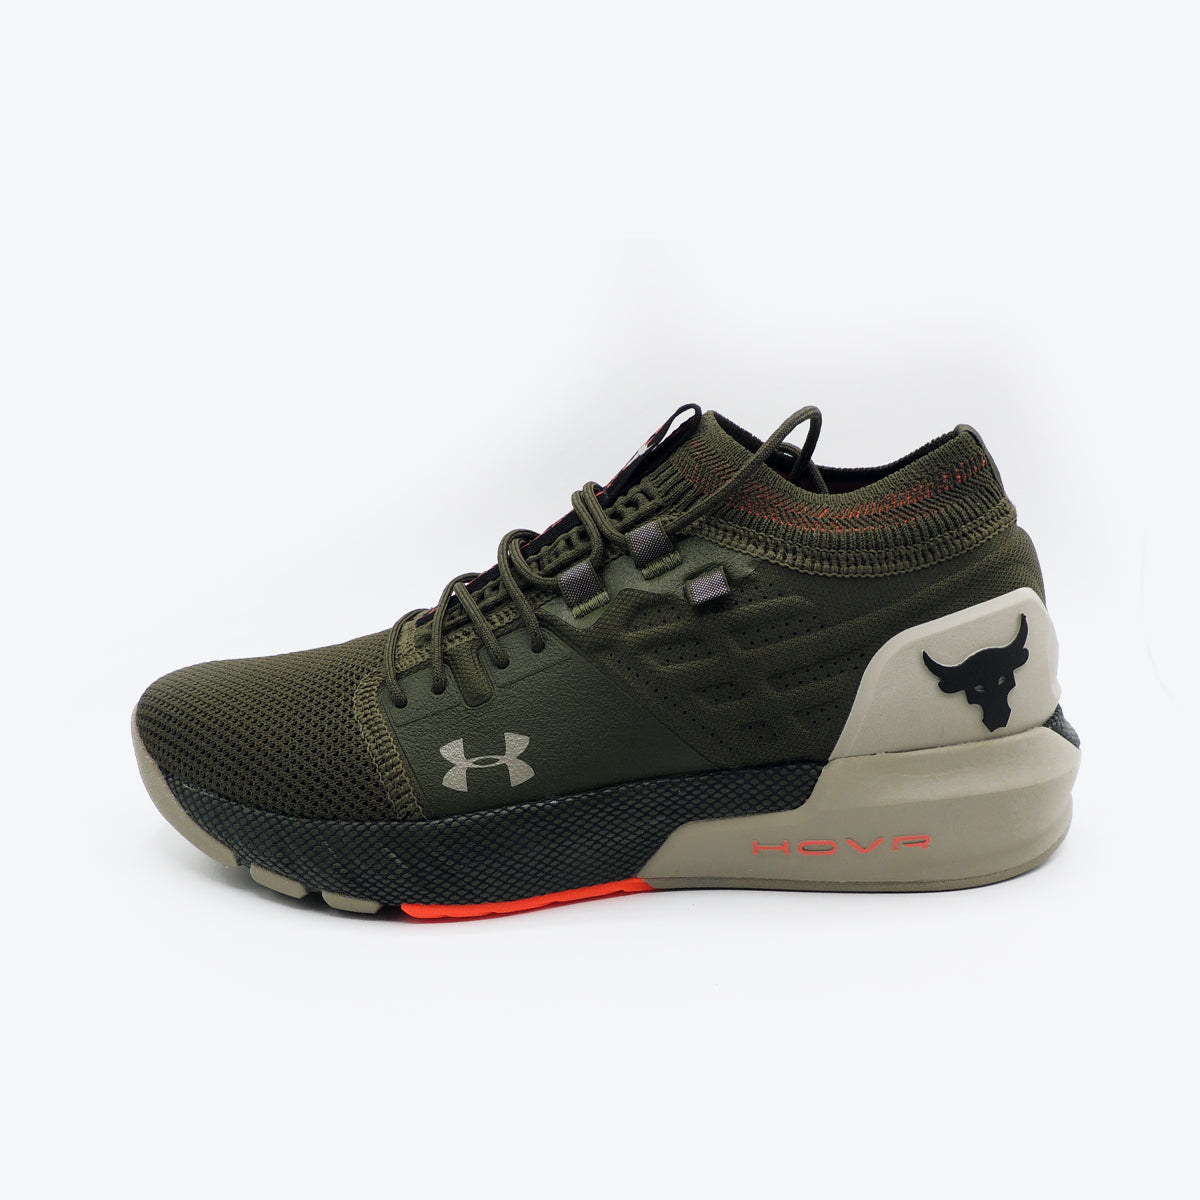 Under Armour Project Rock 2 Men's Trainers Green UK 8.5